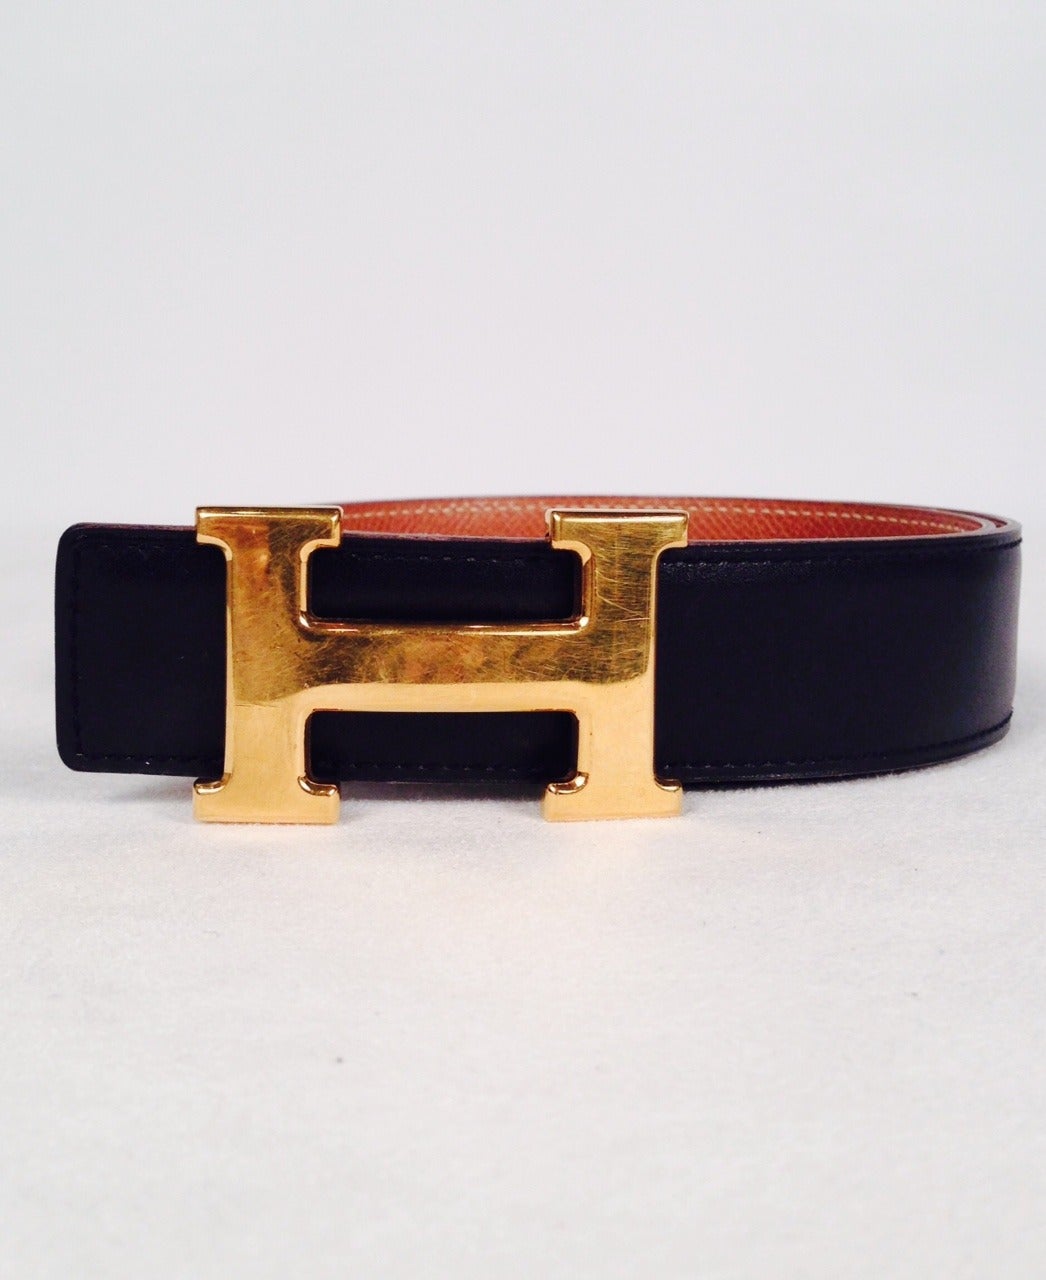 Highly coveted and collectible Hermes reversible belt with black box leather and textured gold leather.  Features over-sized brushed gold tone 